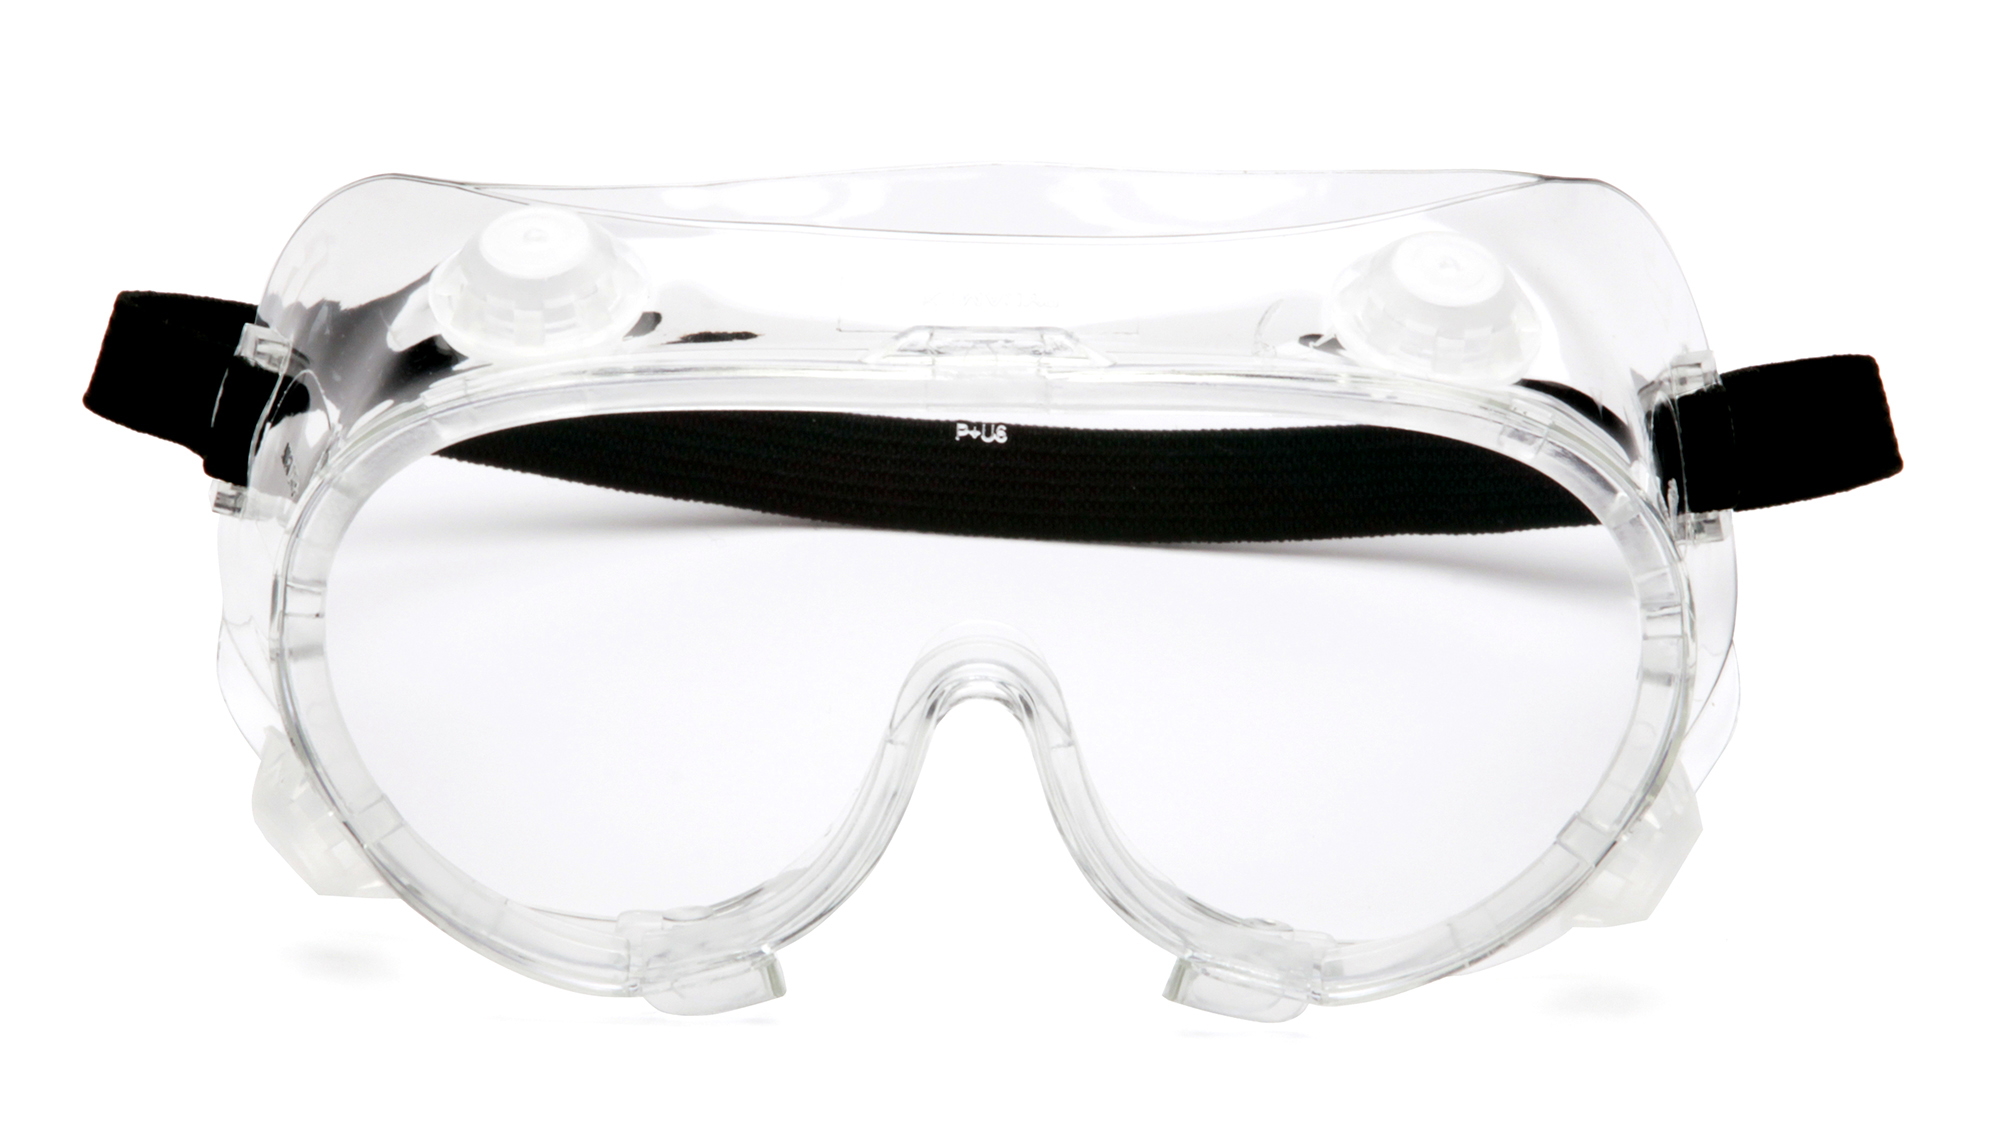 G204 Clear Chemical Goggle | Eyewear Products | Industrial Safety ...